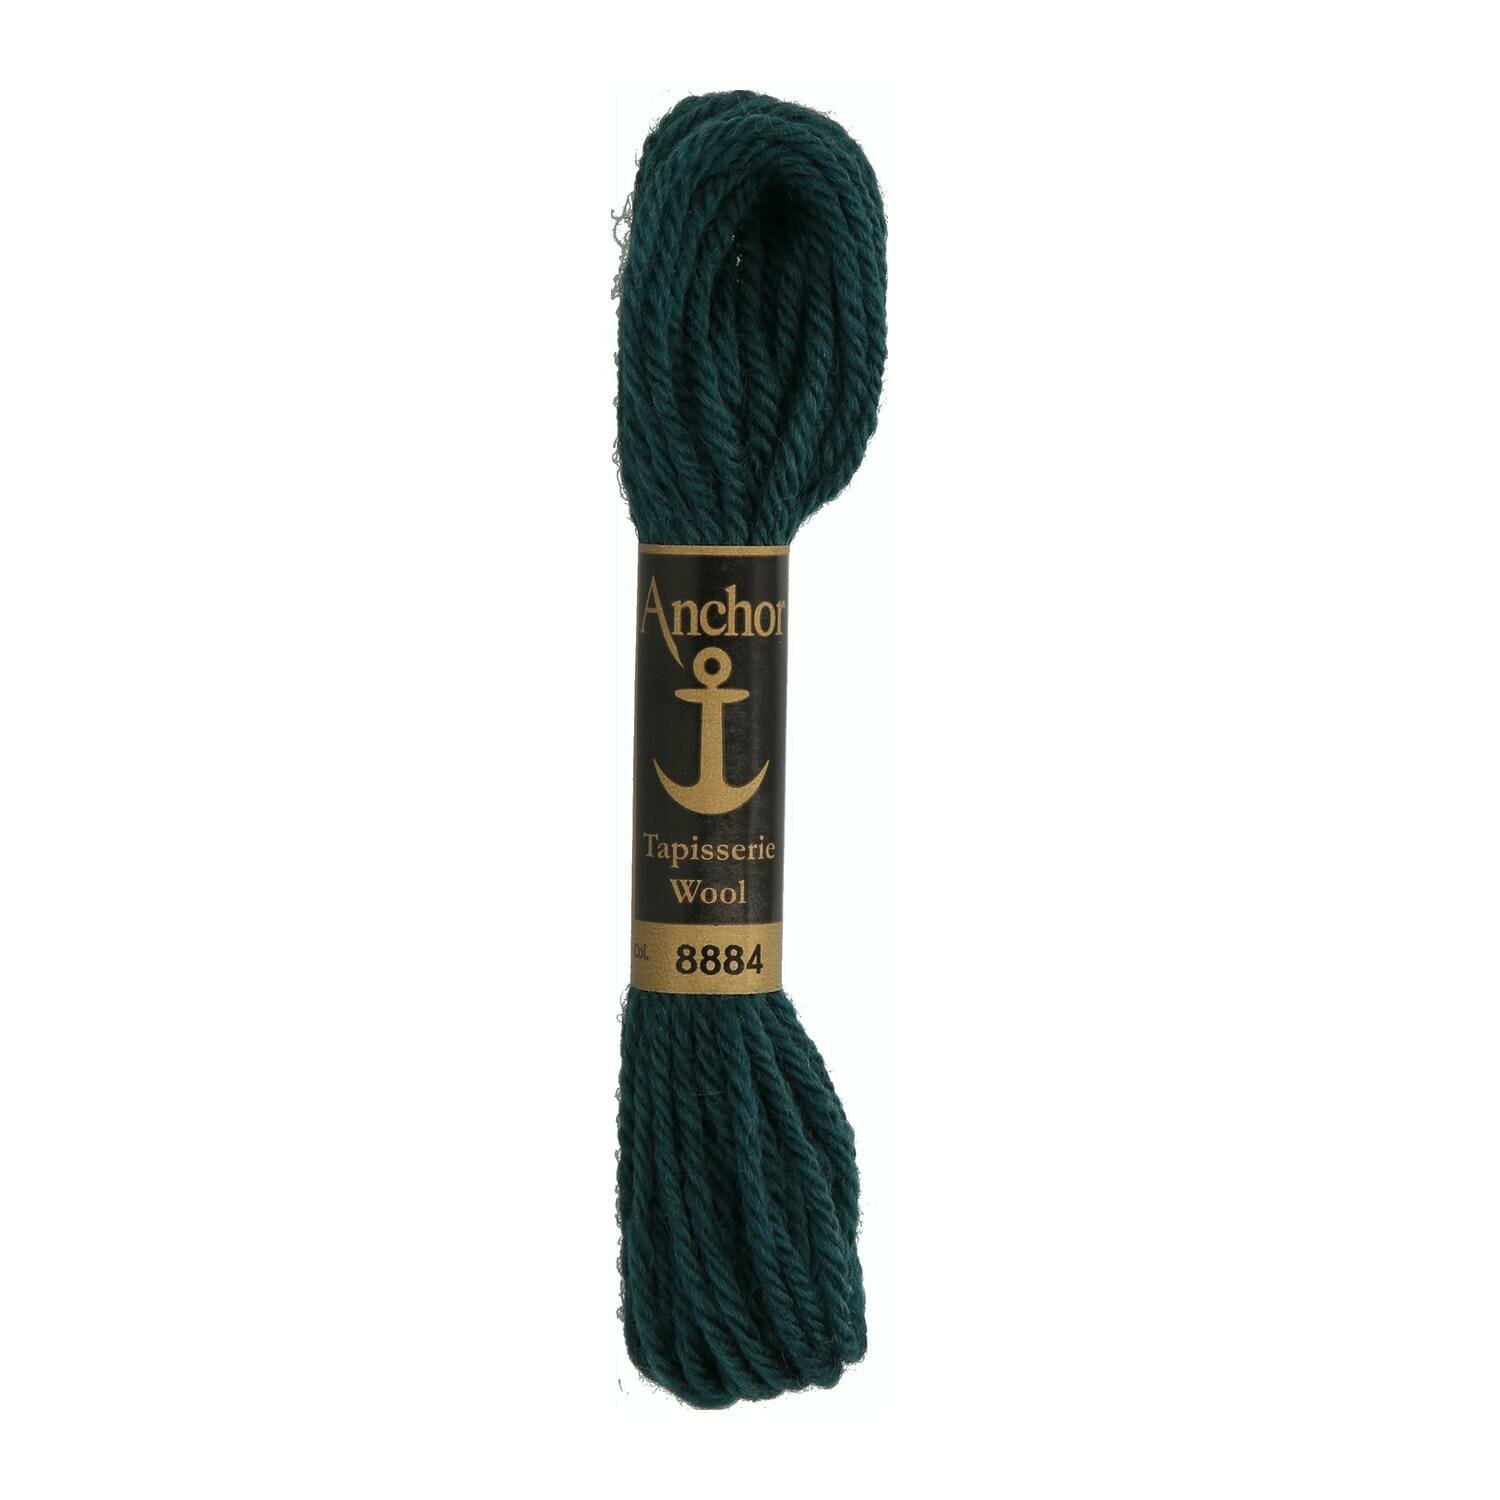 Anchor Tapisserie Wool # 08934